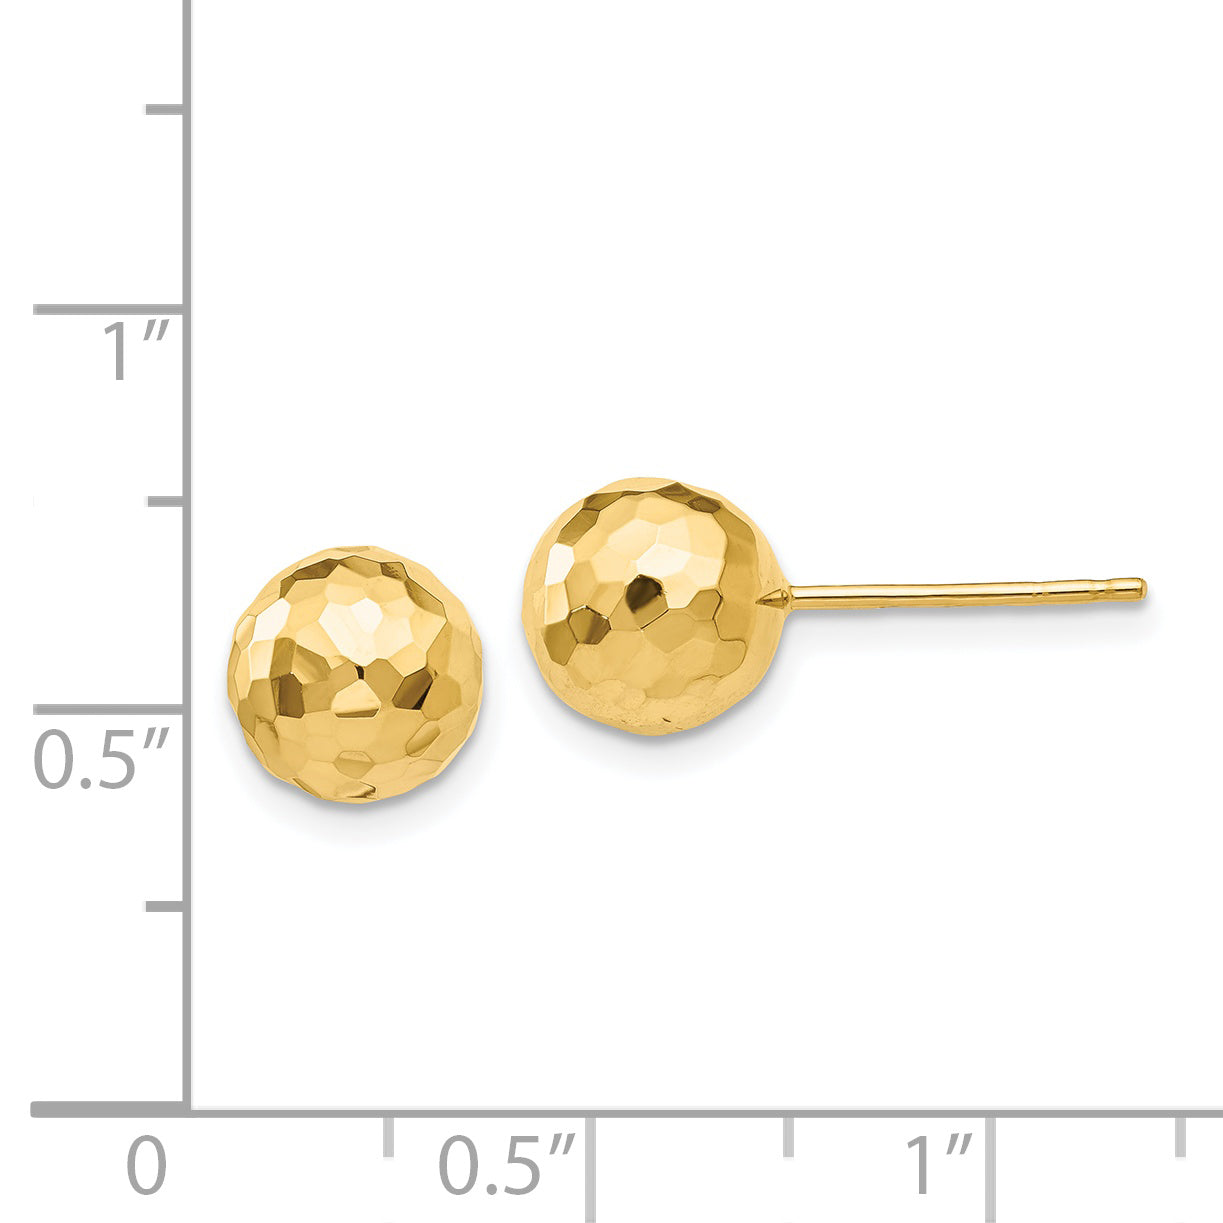 14K Gold Polished and Diamond Cut 8MM Ball Post Earrings